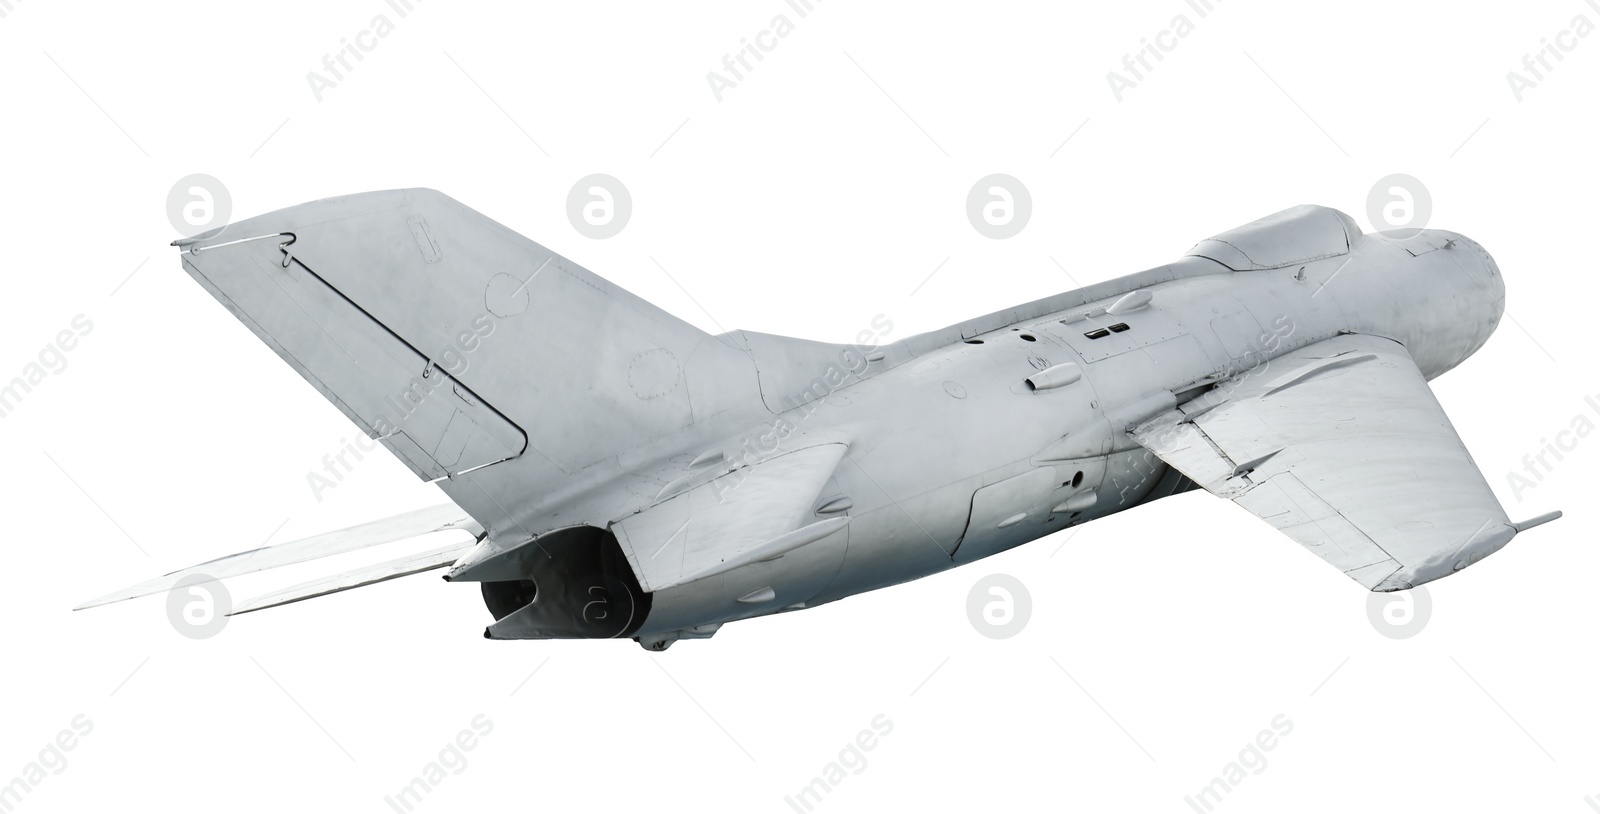 Image of Jet fighter isolated on white, banner design. Military machinery